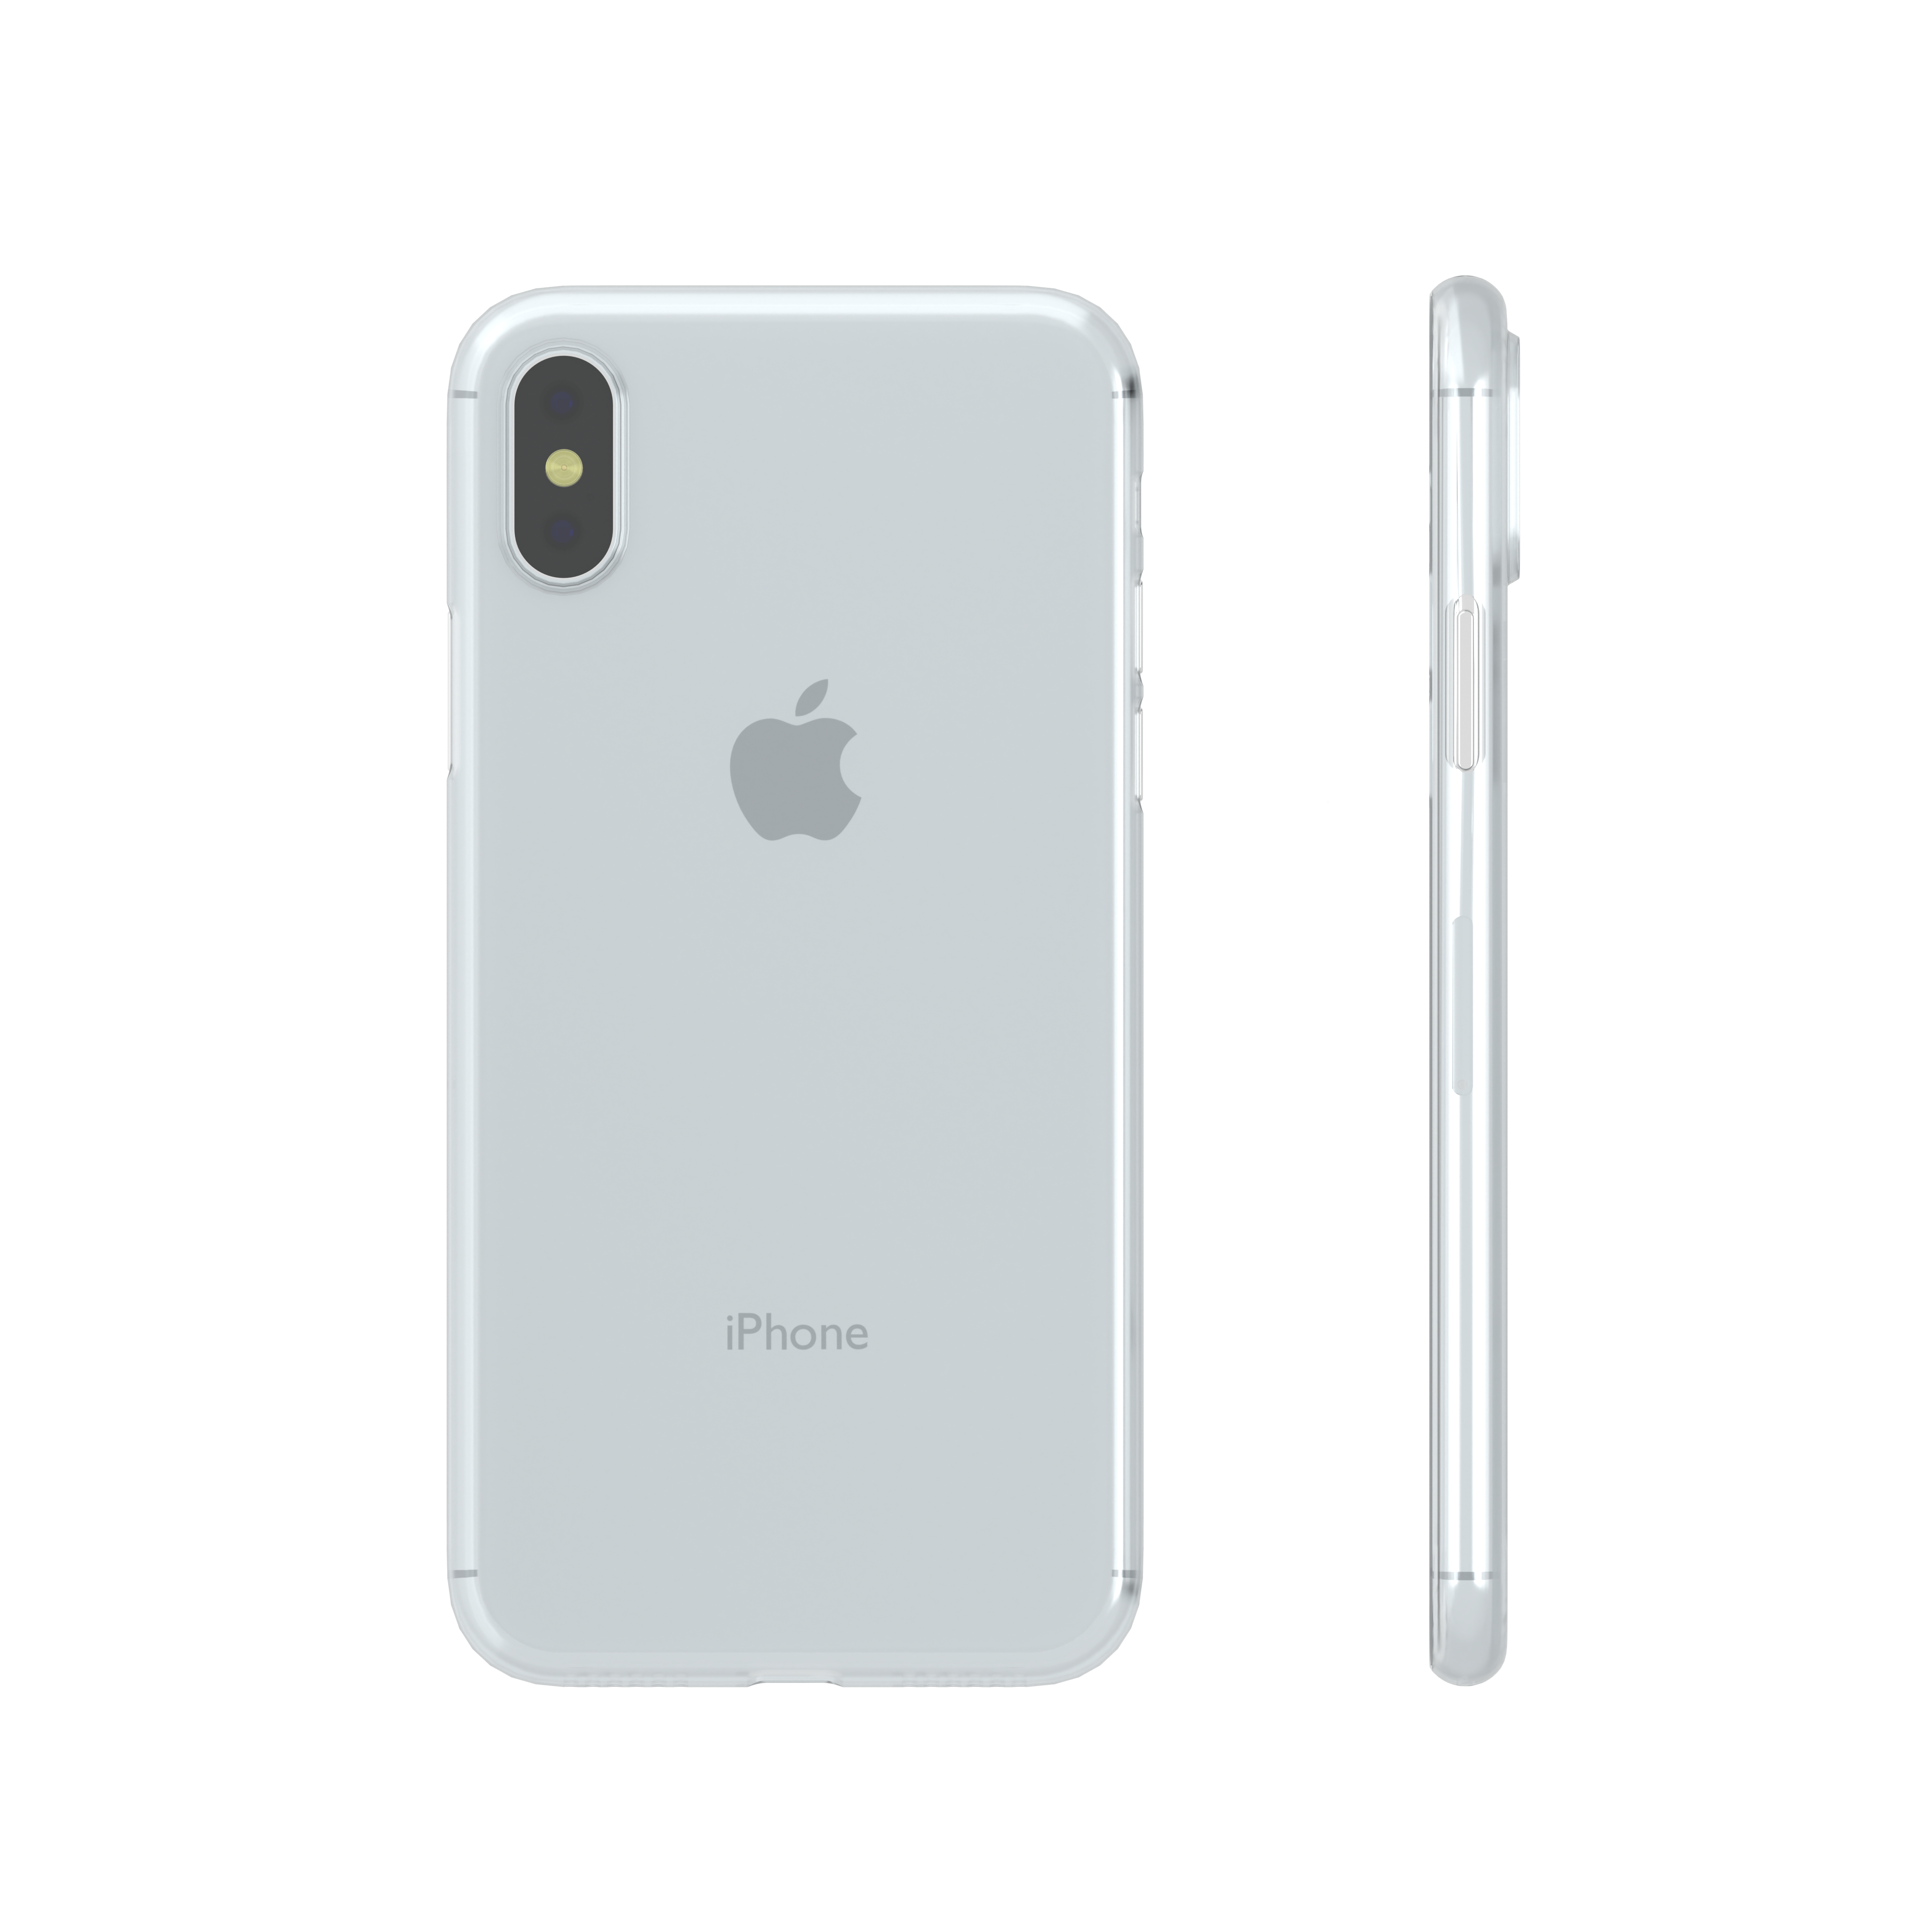 Slimcase for iPhone X